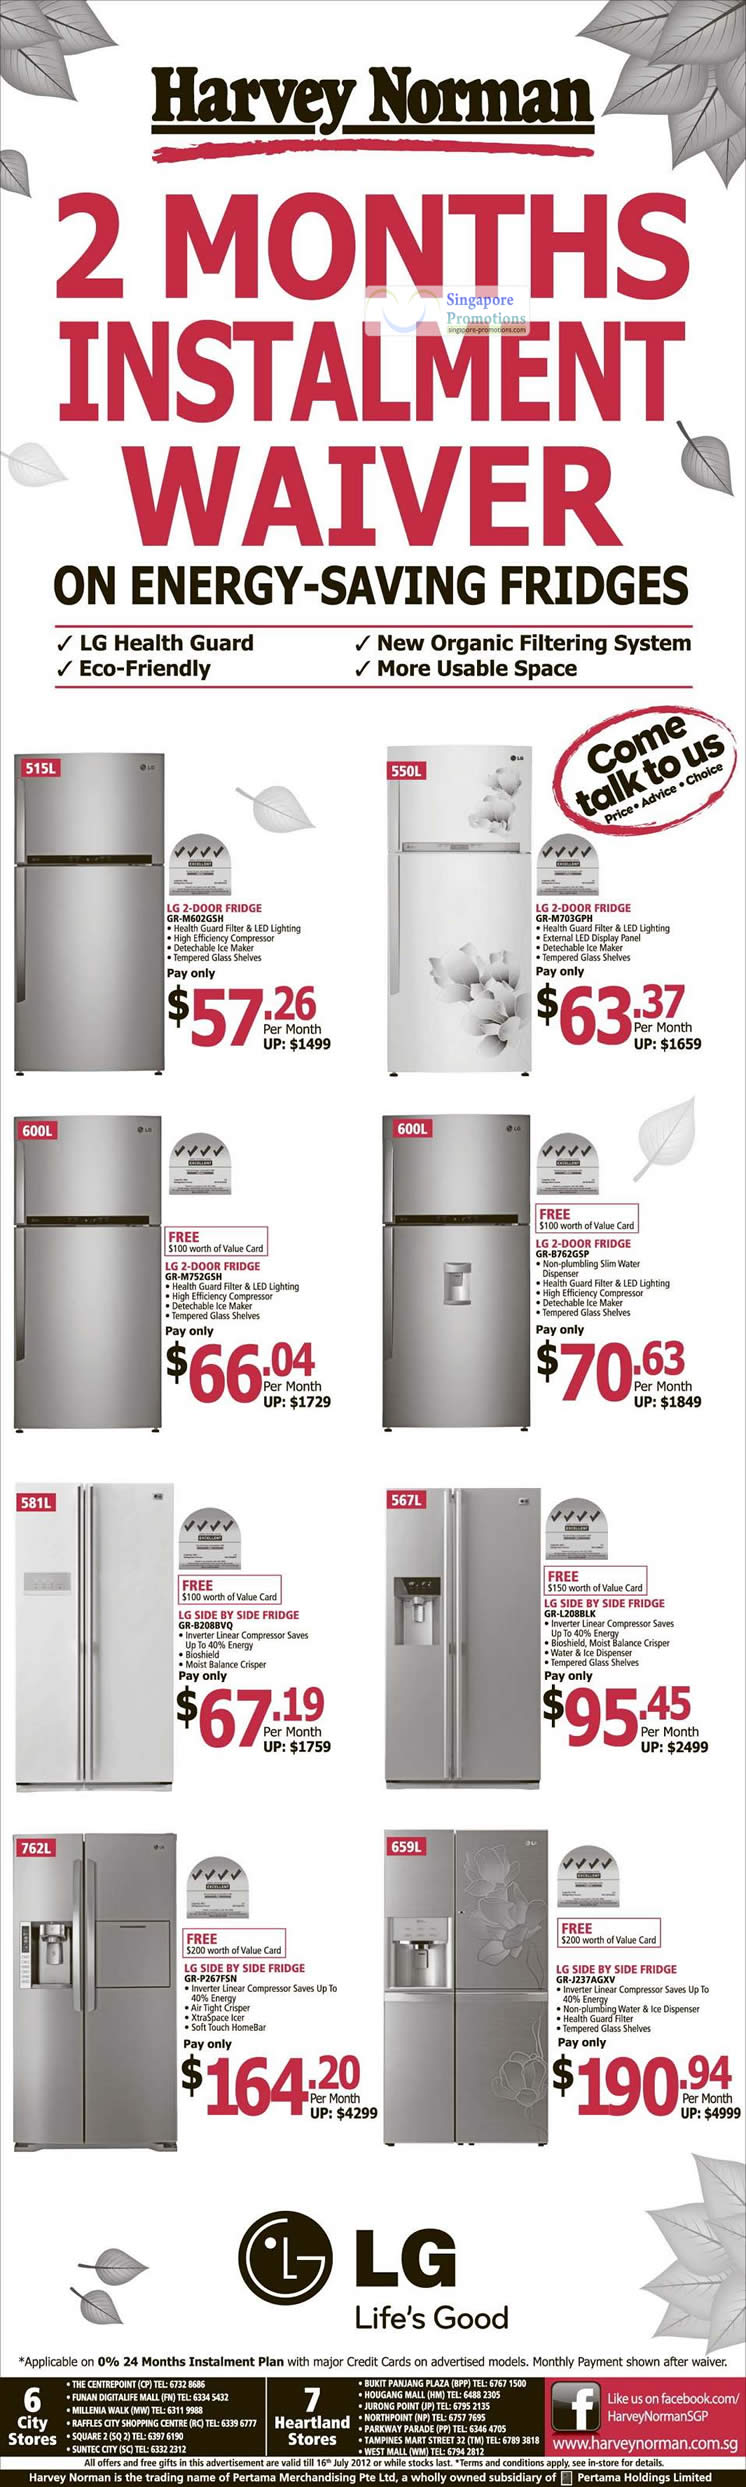 Featured image for Harvey Norman Digital Cameras, Electronics & Appliances Offers 7 - 13 Jul 2012